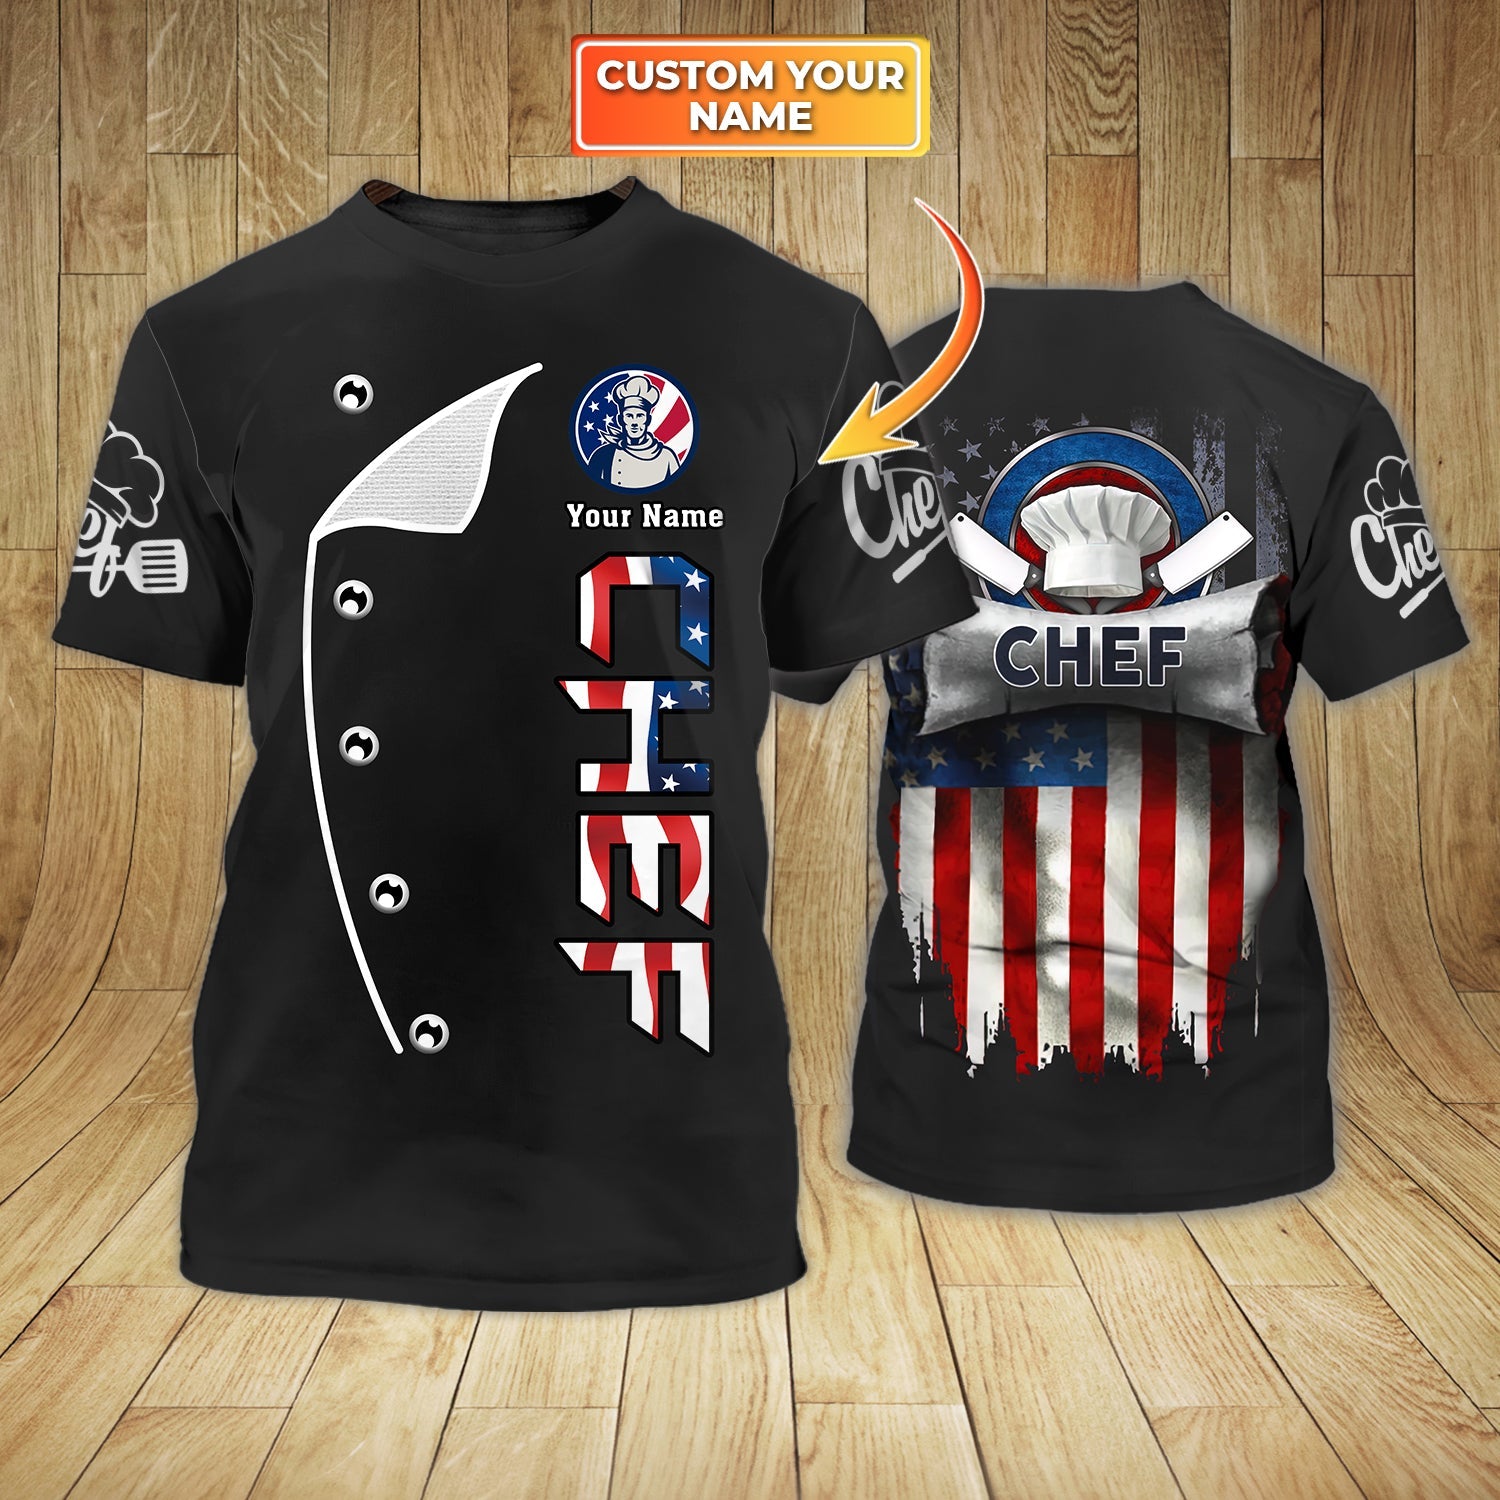 Personalized American Chef T Shirt/ 3D All Over Printed Chef Shirt Usa Flag Pattern/ Chef Shirt